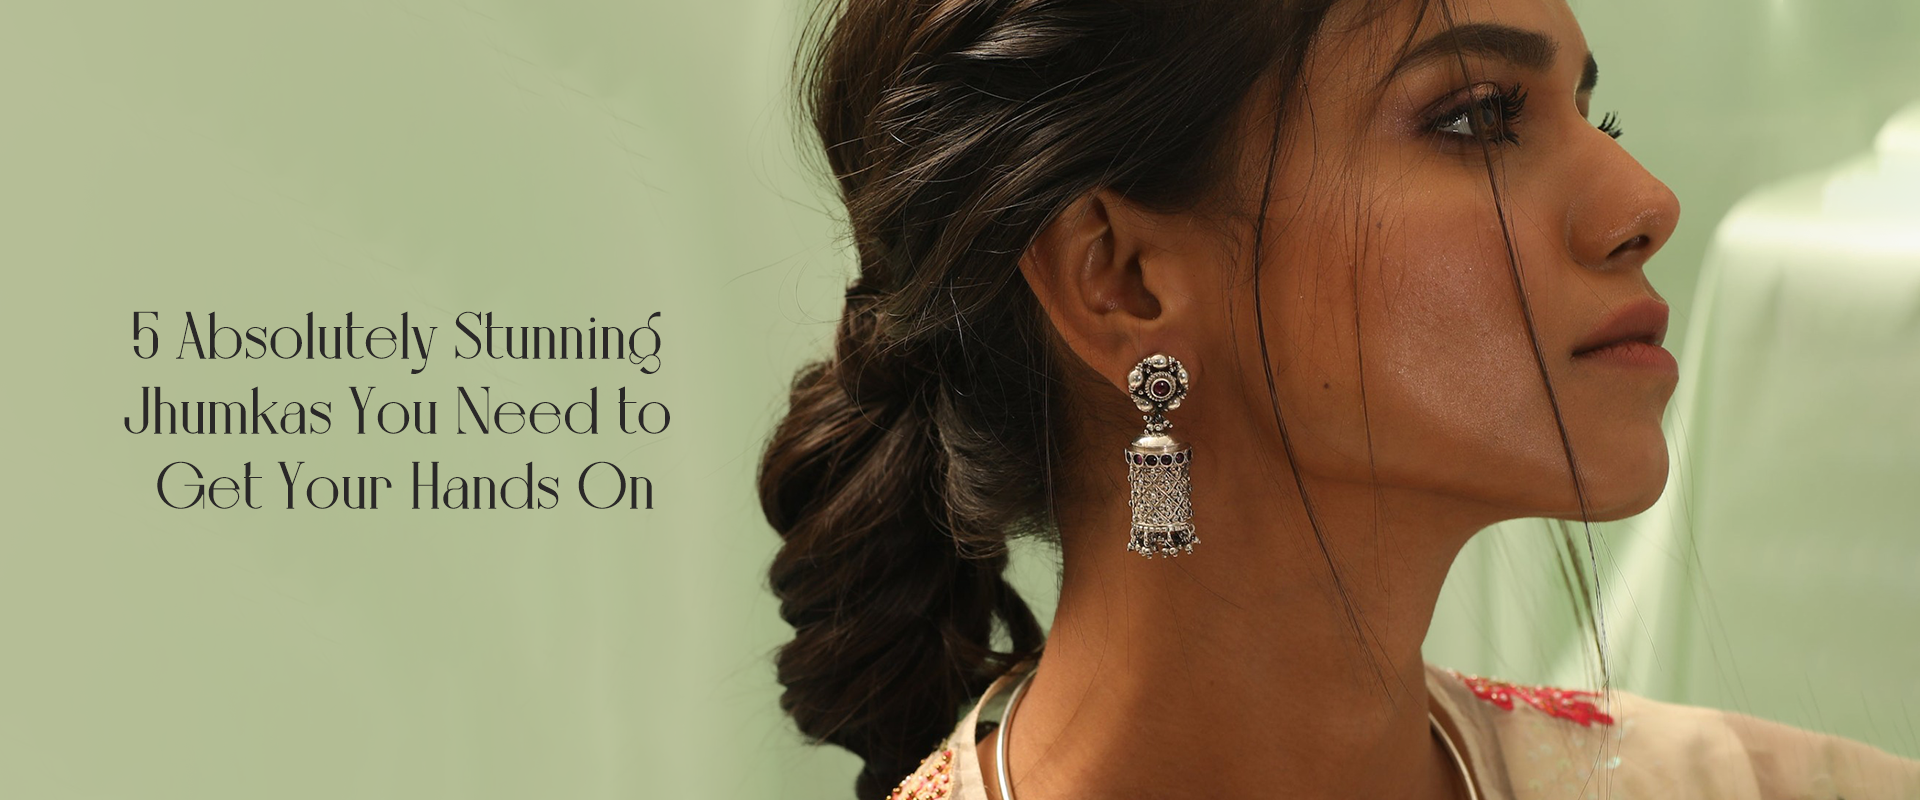 5 Absolutely Stunning Jhumkas You Need to Get Your Hands On